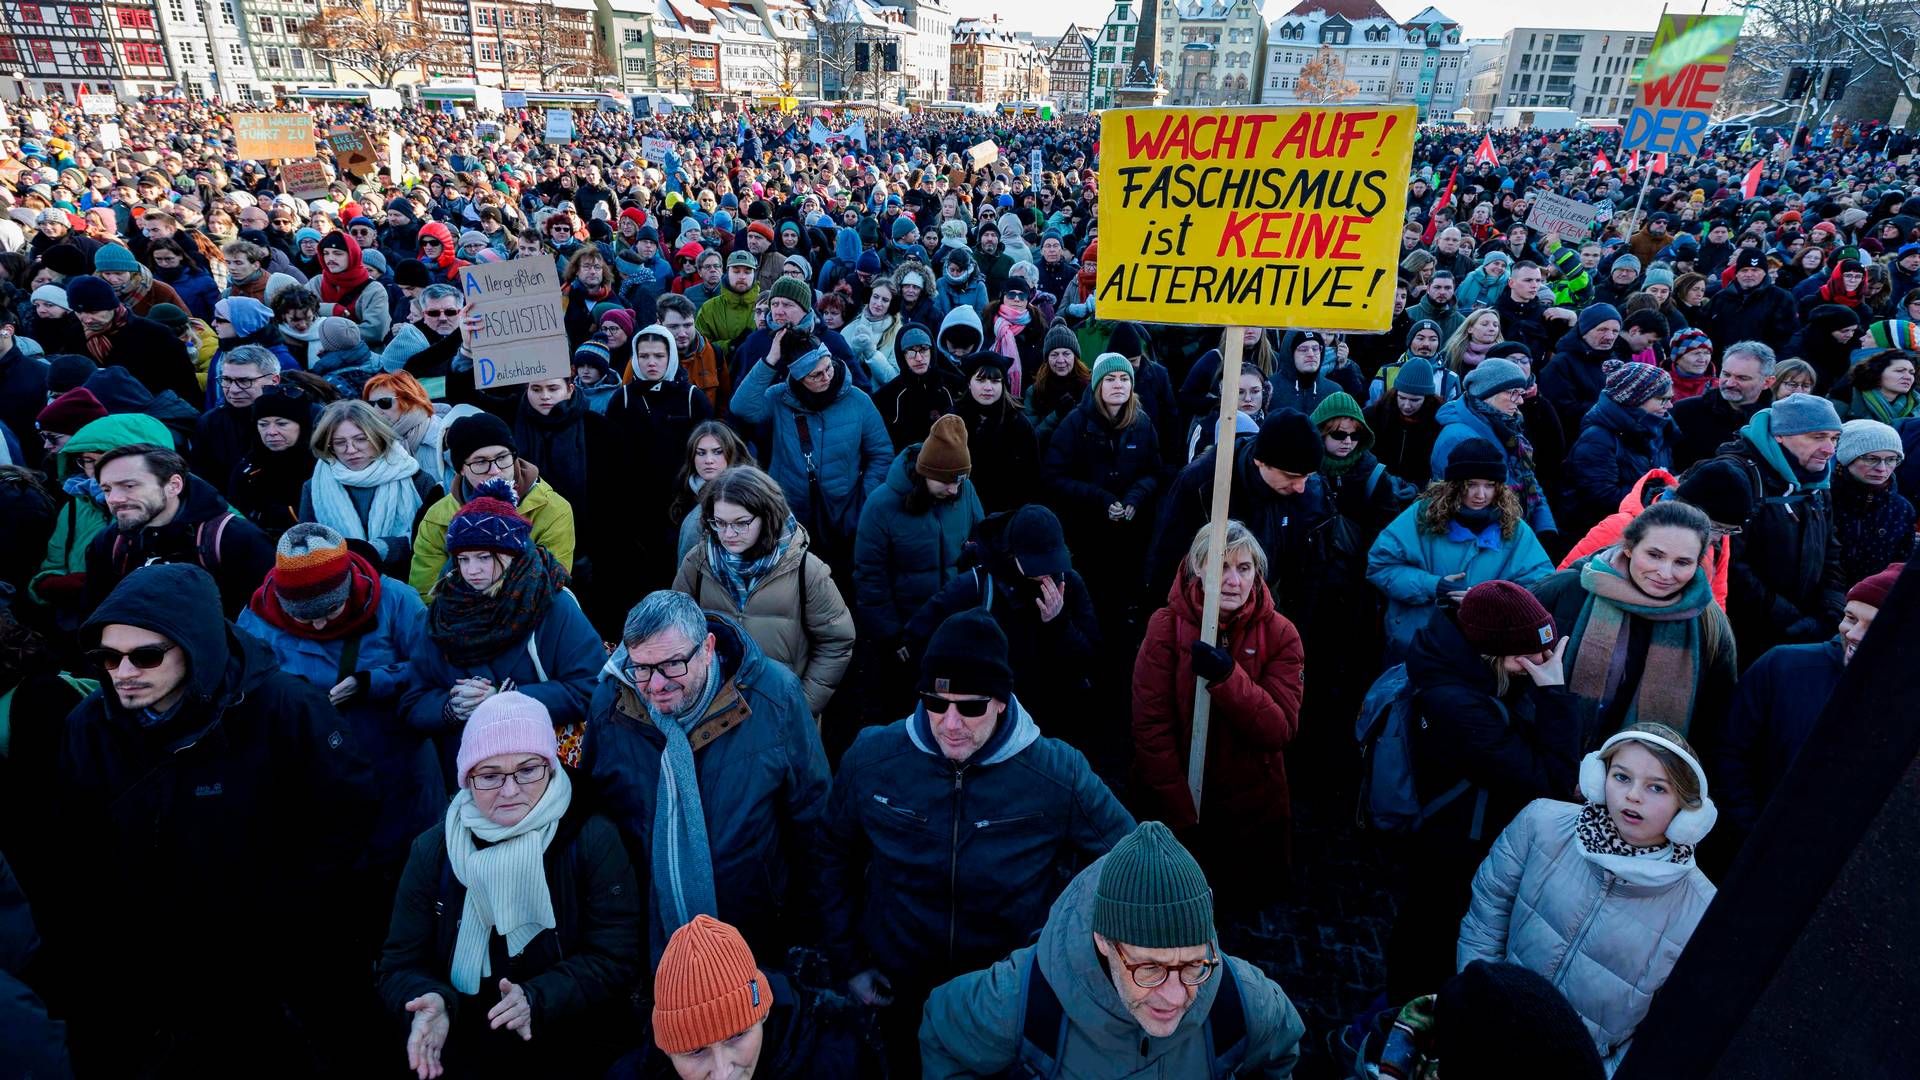 Hundreds of thousands demonstrated against racism and facism in Germany last weekend. This follows the rise of the German right-wing party AFD. | Photo: Jens Schlueter/AFP/Ritzau Scanpix